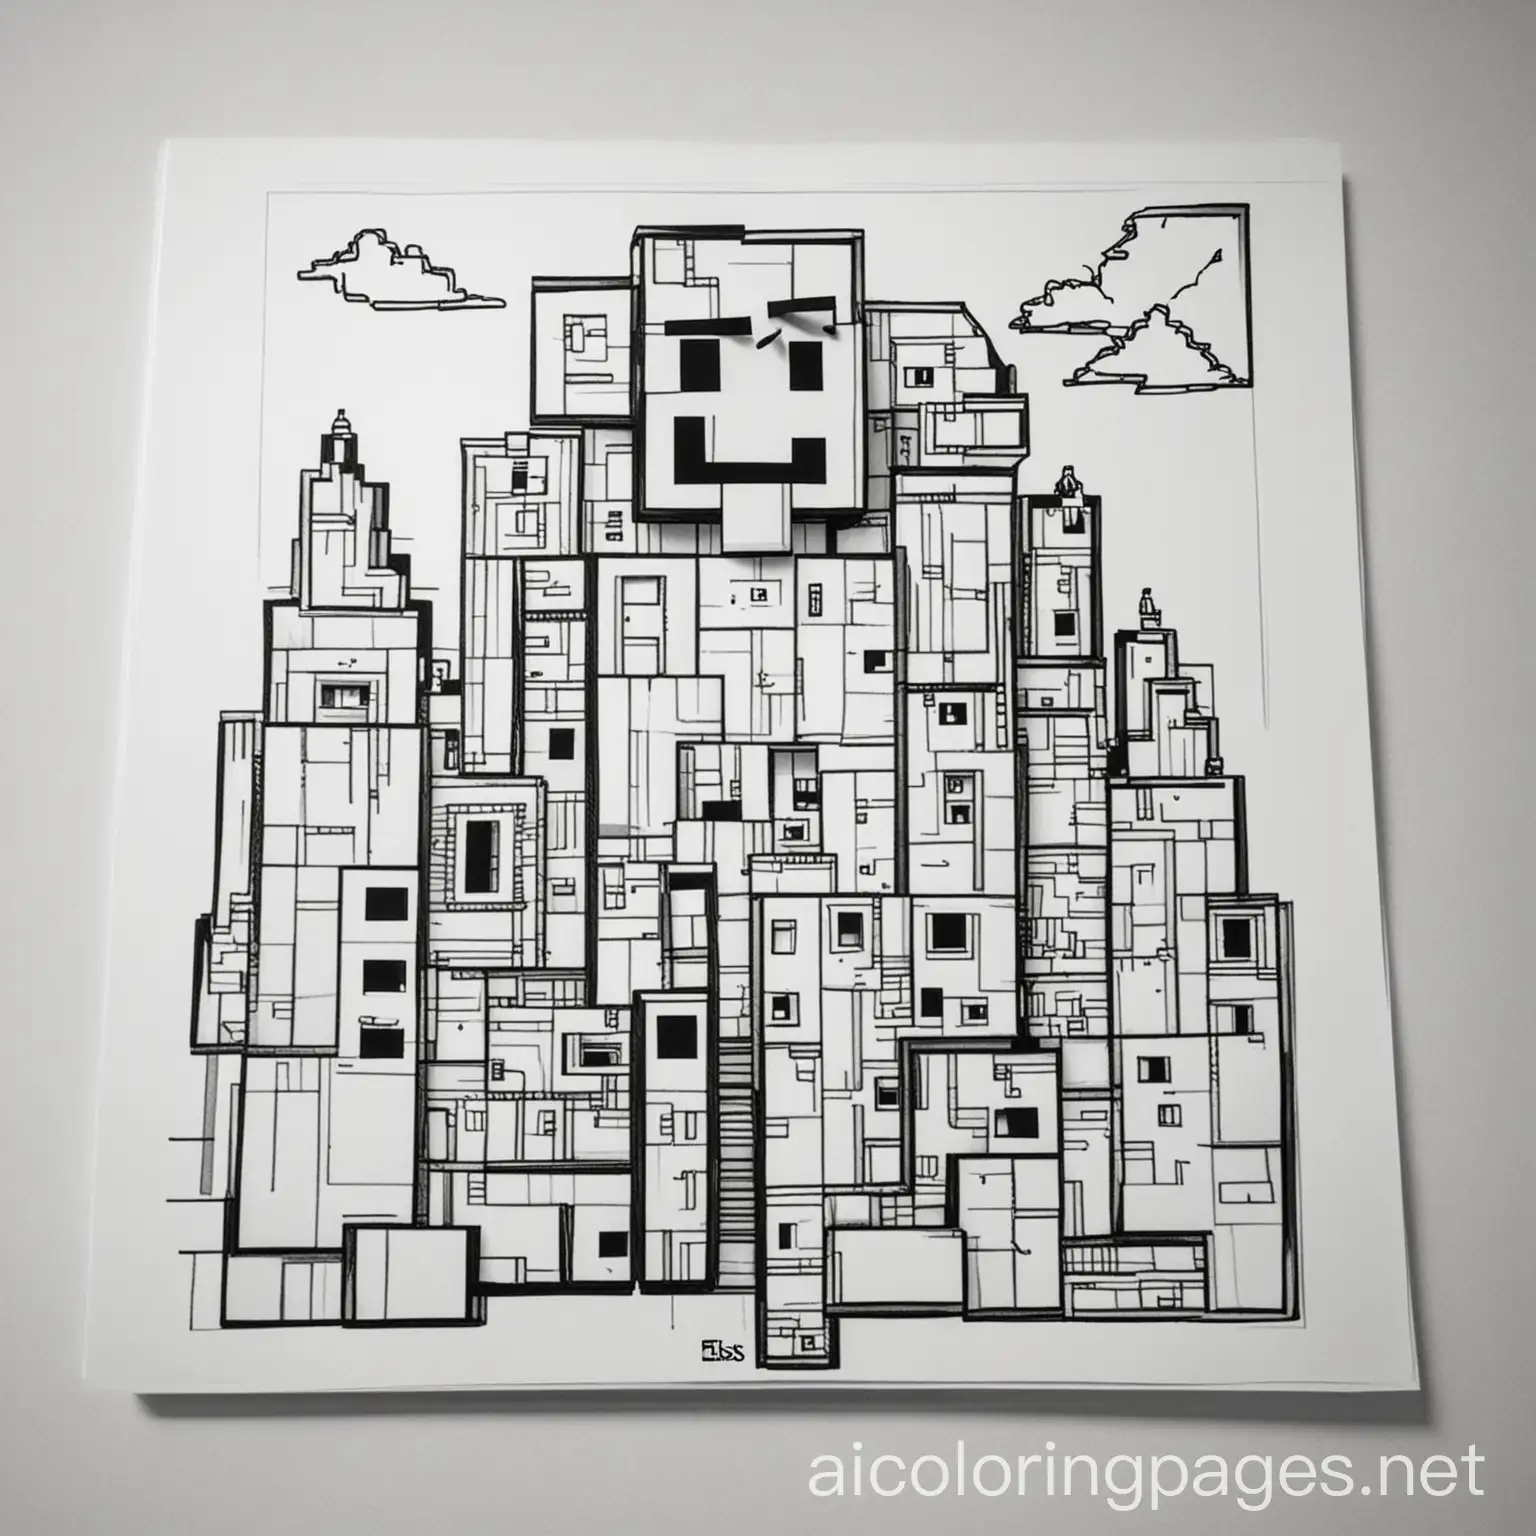 Minecraft-Building-Coloring-Page-for-Kids-Simple-Line-Art-on-White-Background